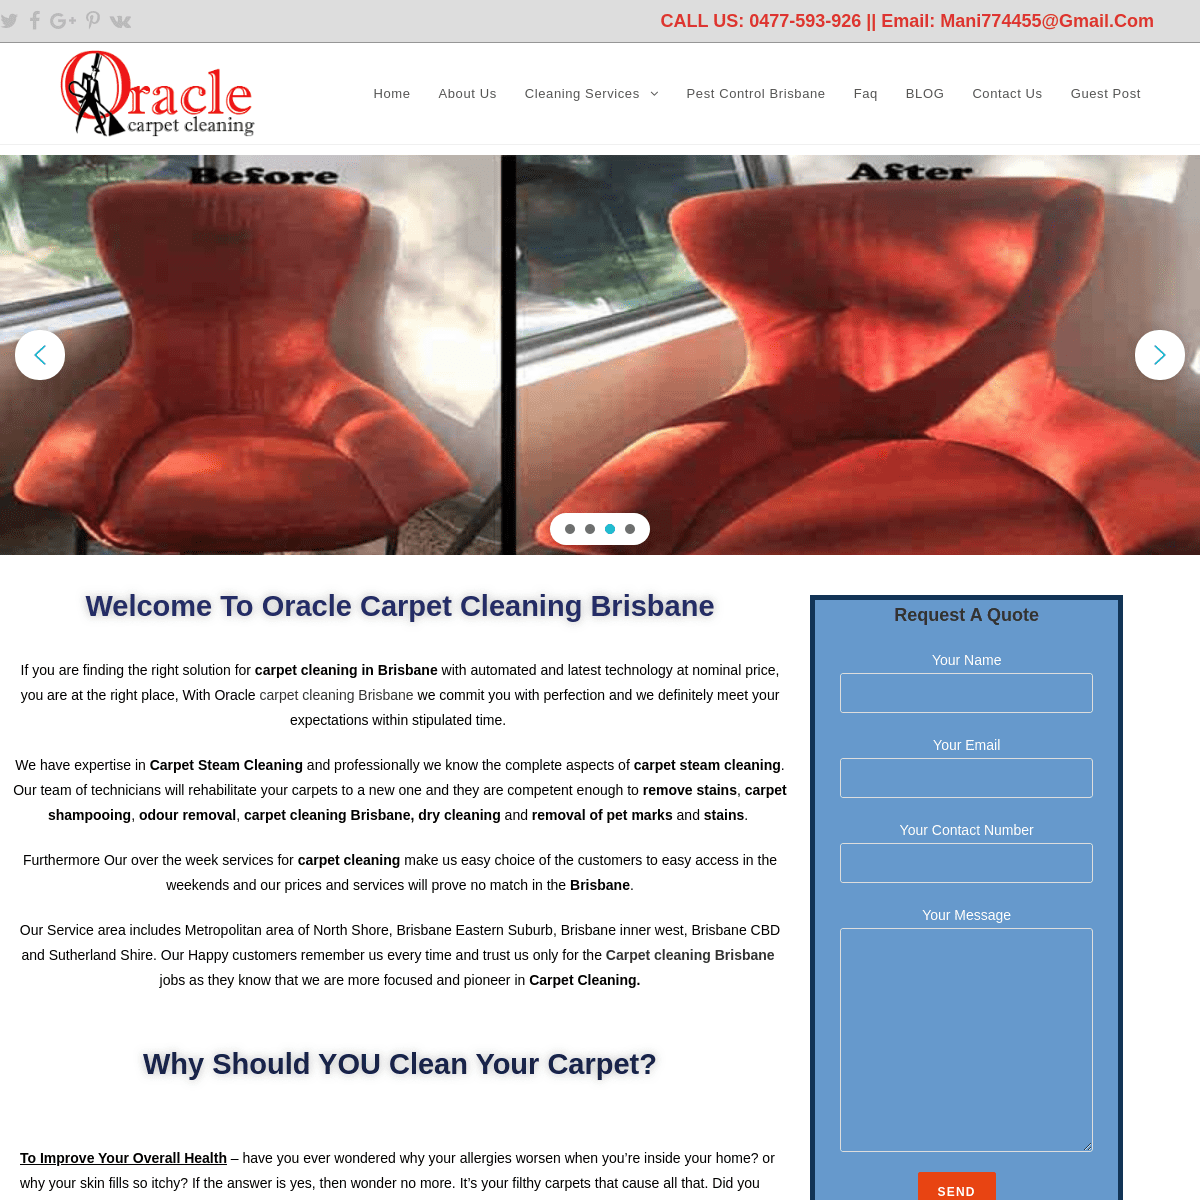 A complete backup of oraclecarpetcleaning.com.au